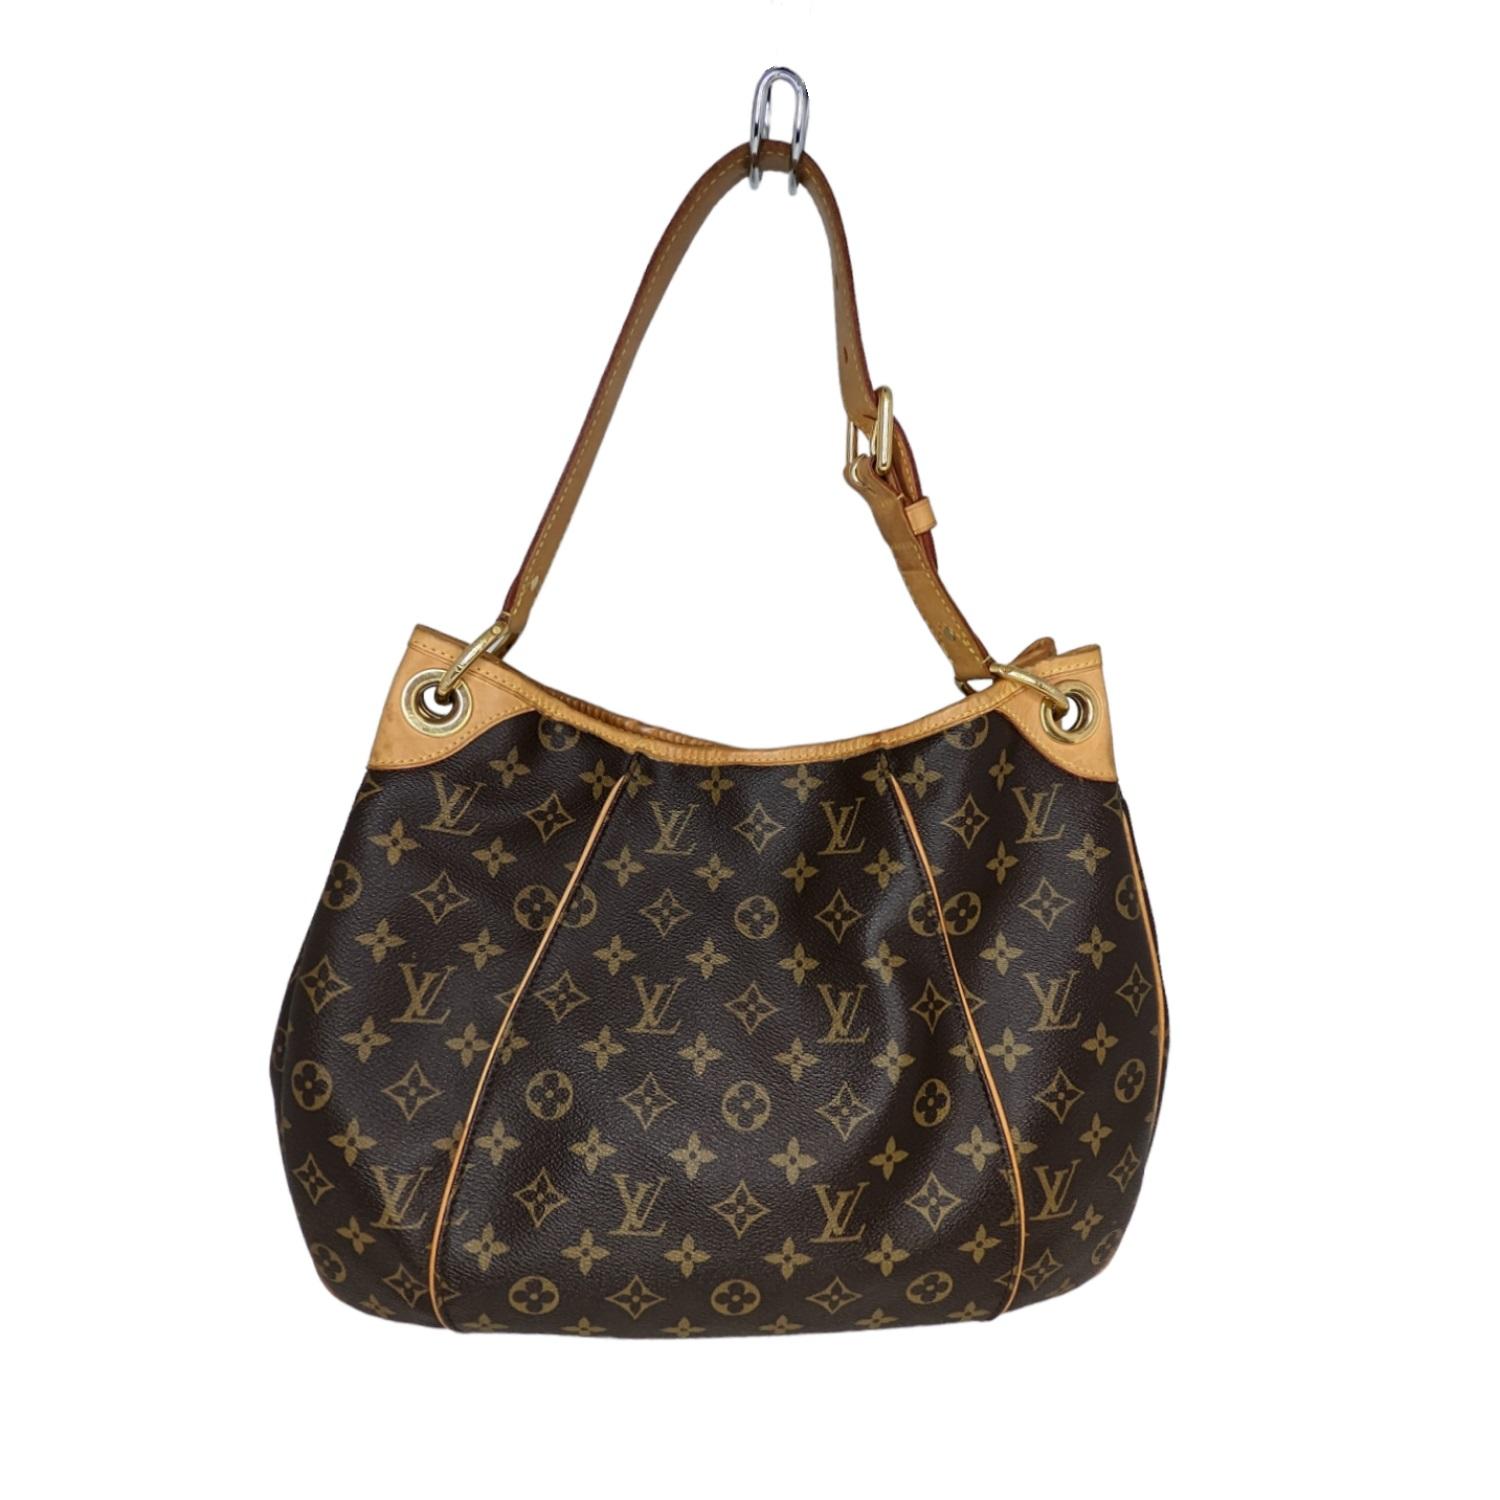 This fashionable hobo style handbag is crafted of Louis Vuitton's signature monogram canvas in brown. It features a vachetta cowhide leather looping shoulder strap, piping, trim, and brass hardware. The top opens to a beige microfiber interior with